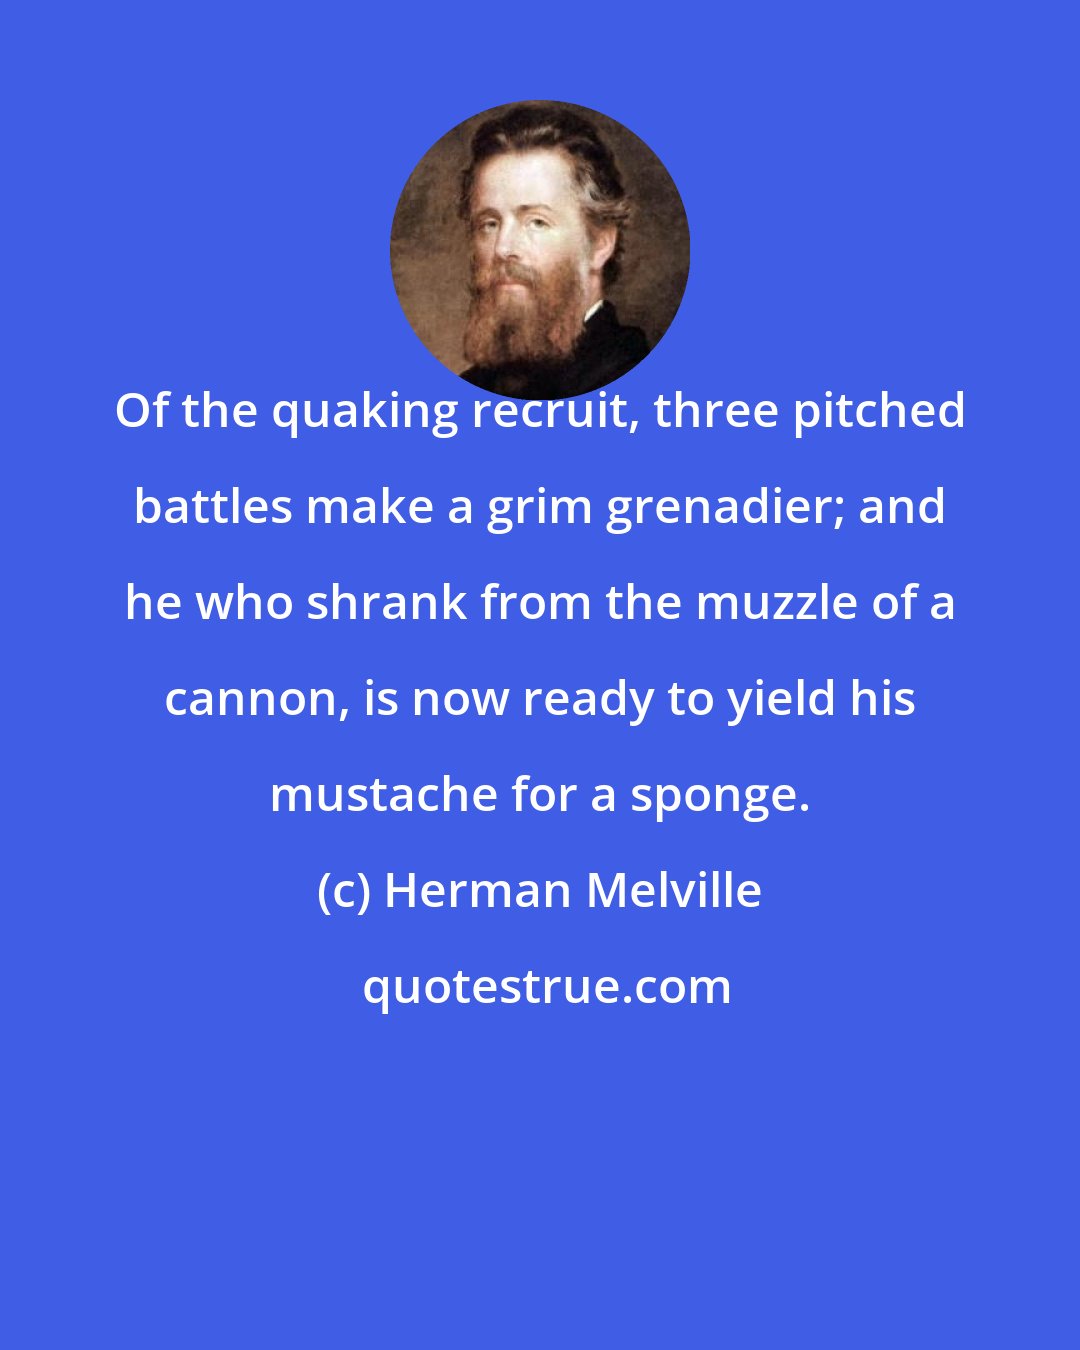 Herman Melville: Of the quaking recruit, three pitched battles make a grim grenadier; and he who shrank from the muzzle of a cannon, is now ready to yield his mustache for a sponge.